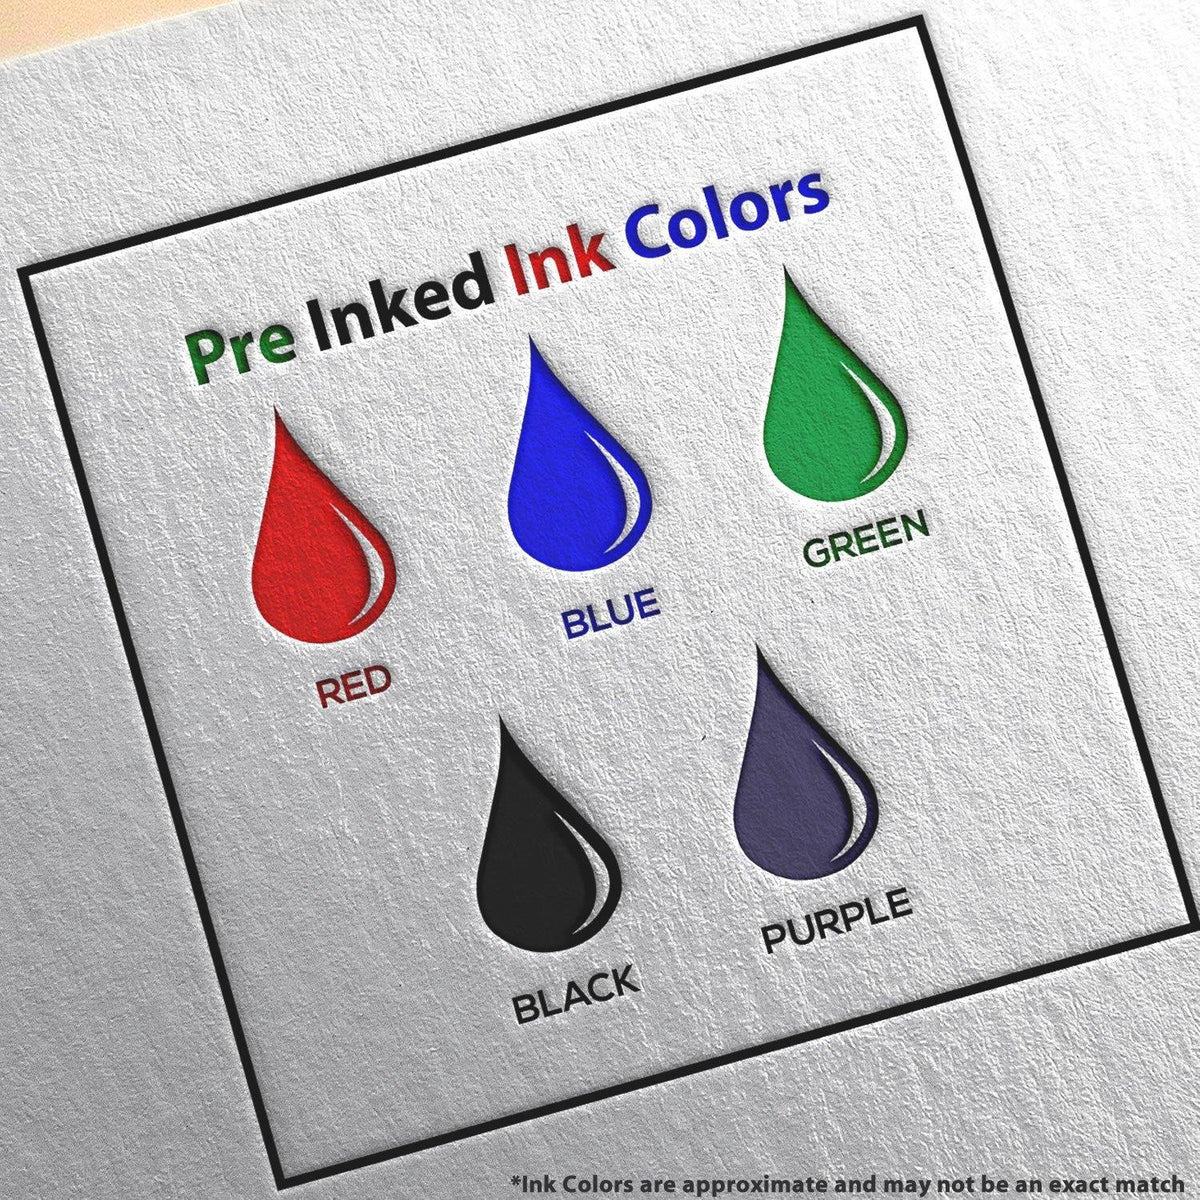 Slim Pre Inked Two Thumbs Up Stamp Ink Color Options